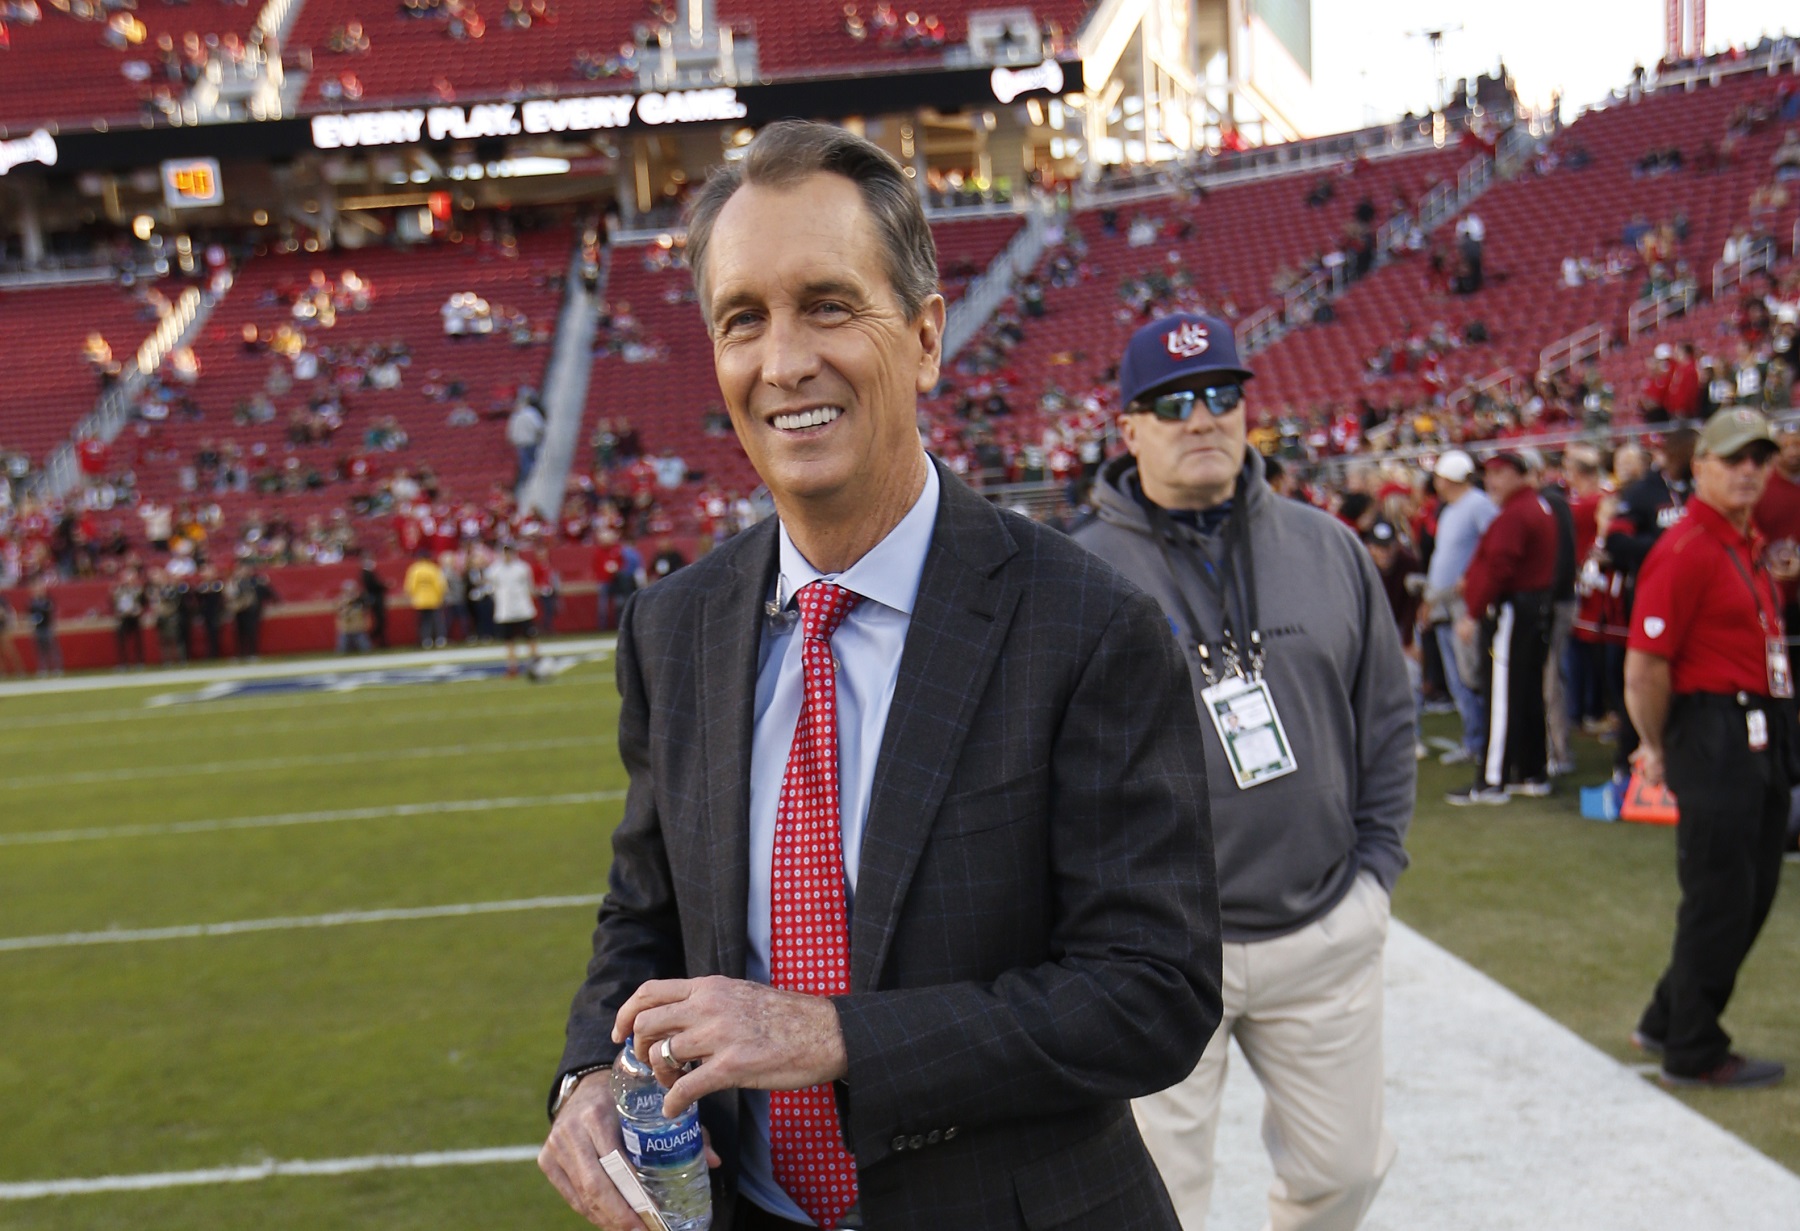 Cris Collinsworth Owned up To His Huge Faux Pas During a Controversial NFL Playoff Game